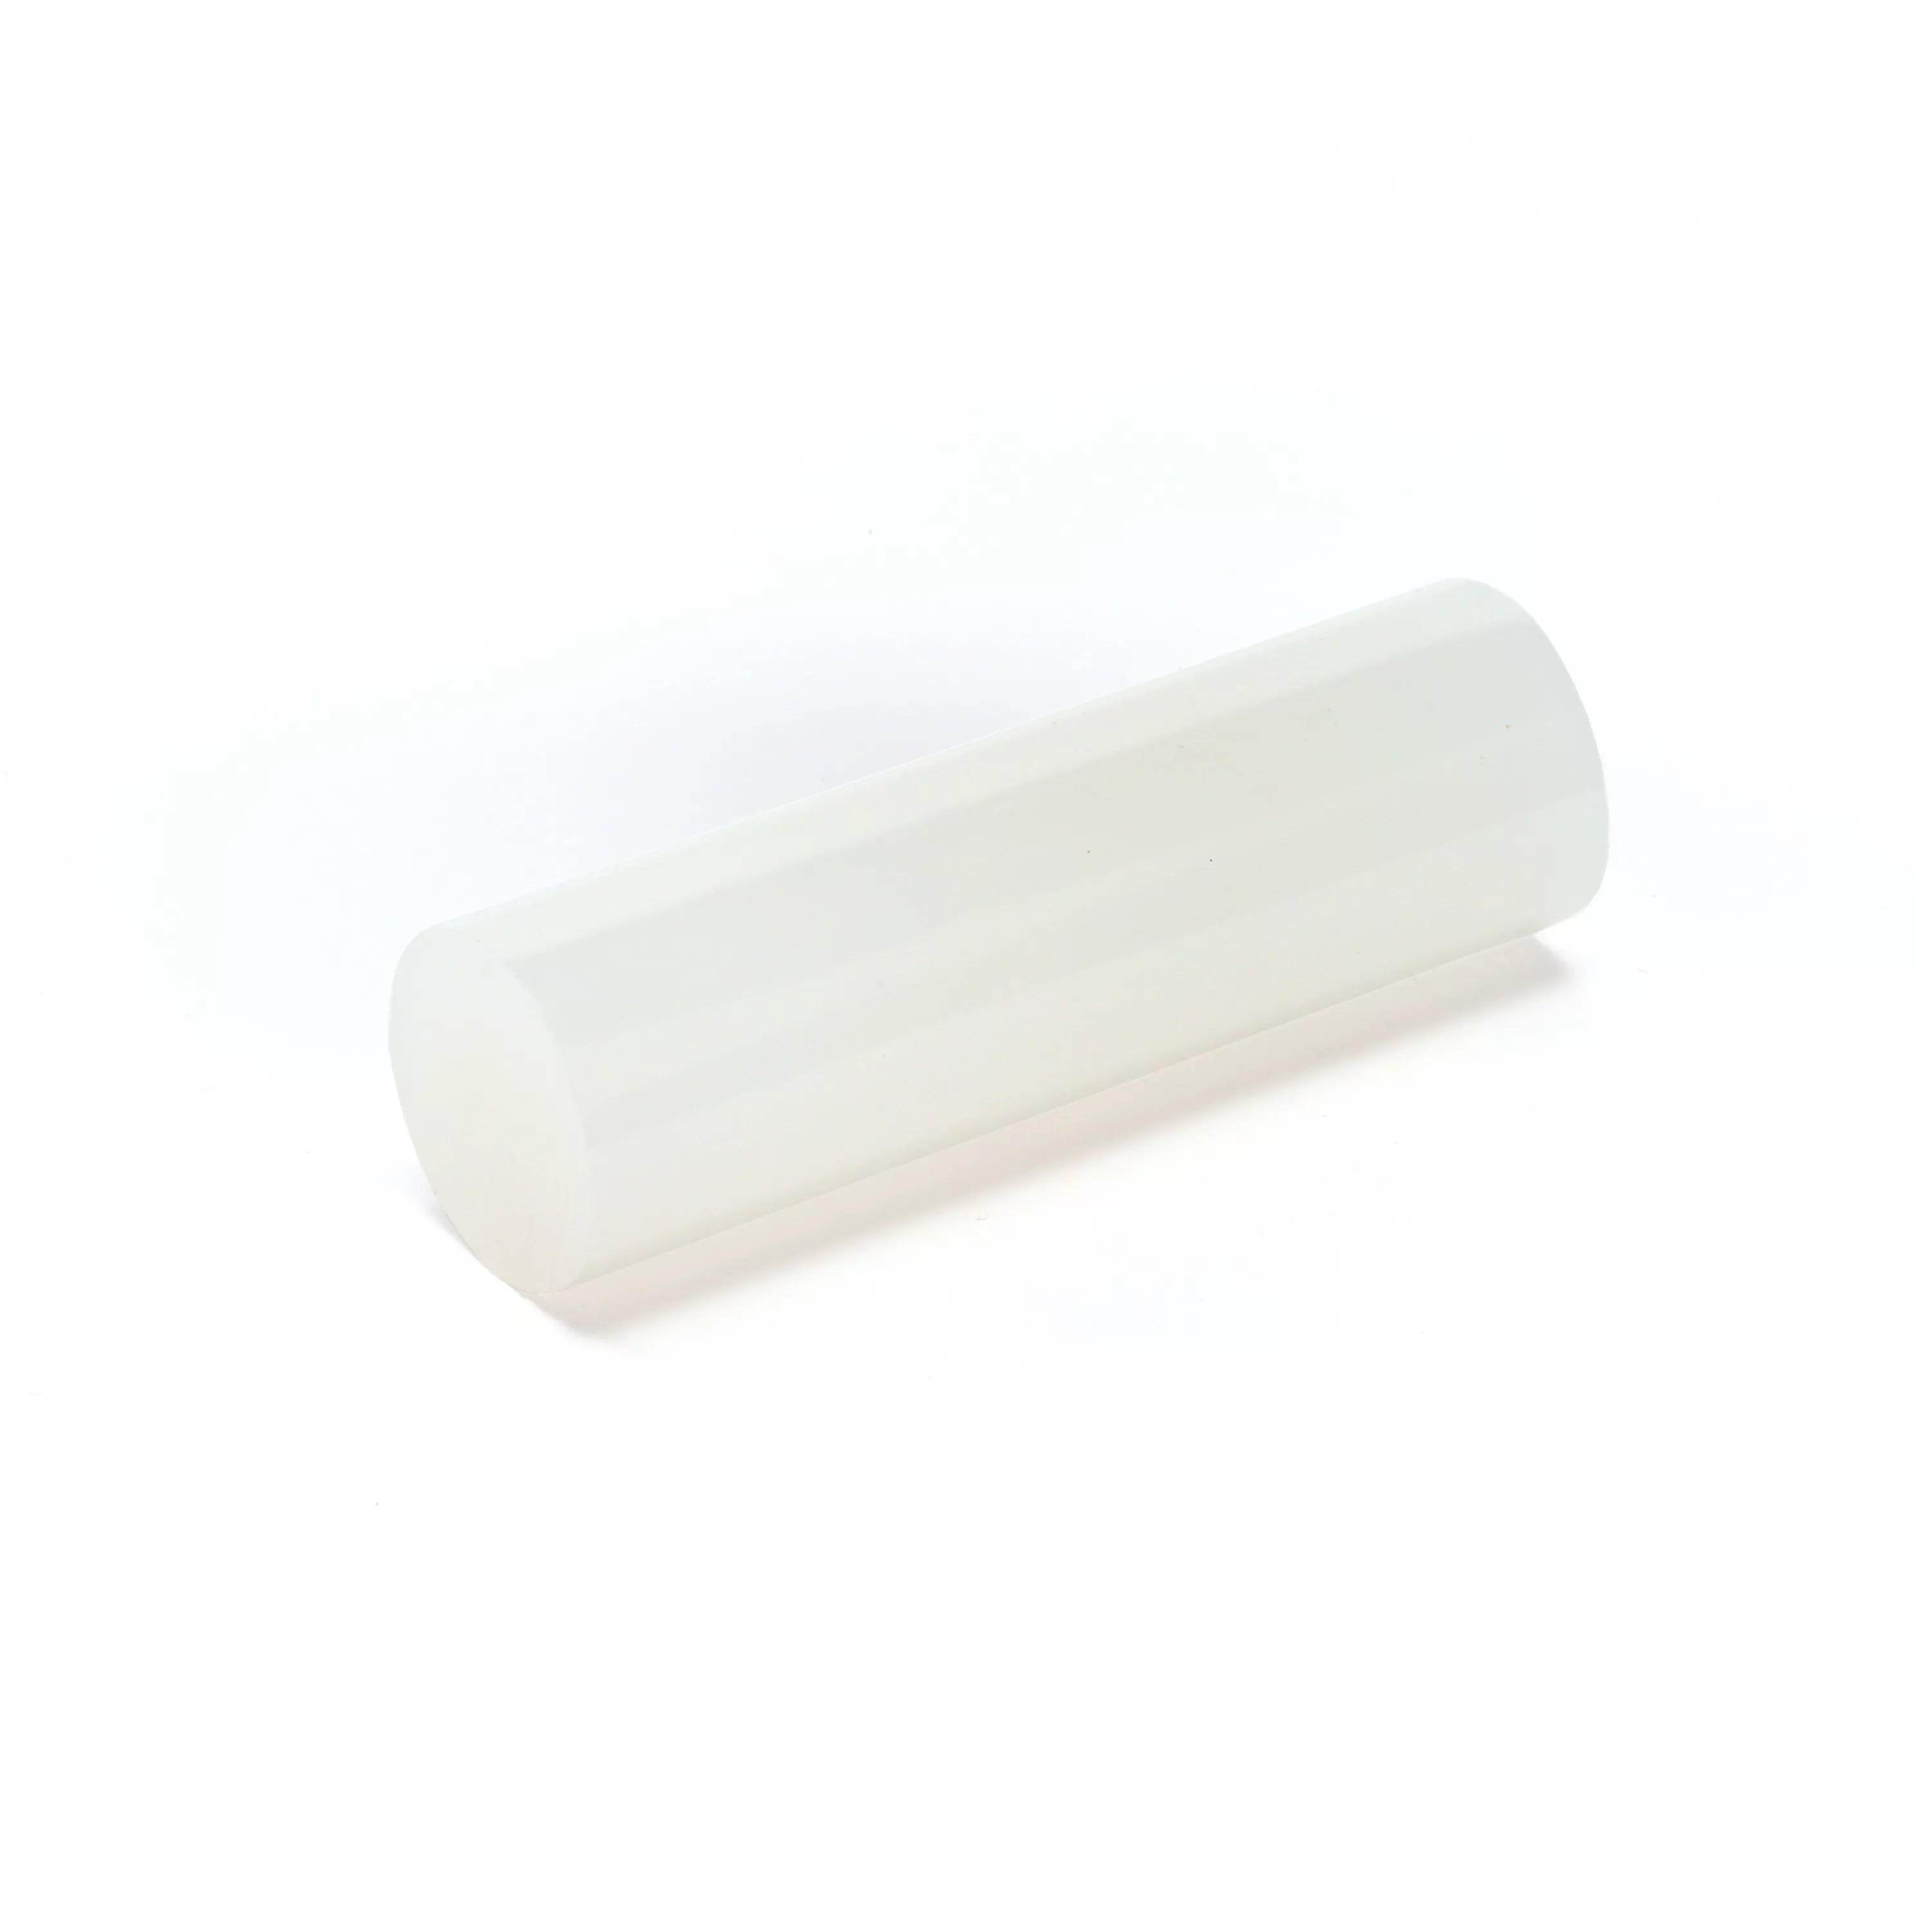 3M™ Hot Melt Adhesive 3764TC, Clear, 5/8 in x 2 in, 11 lb, Case